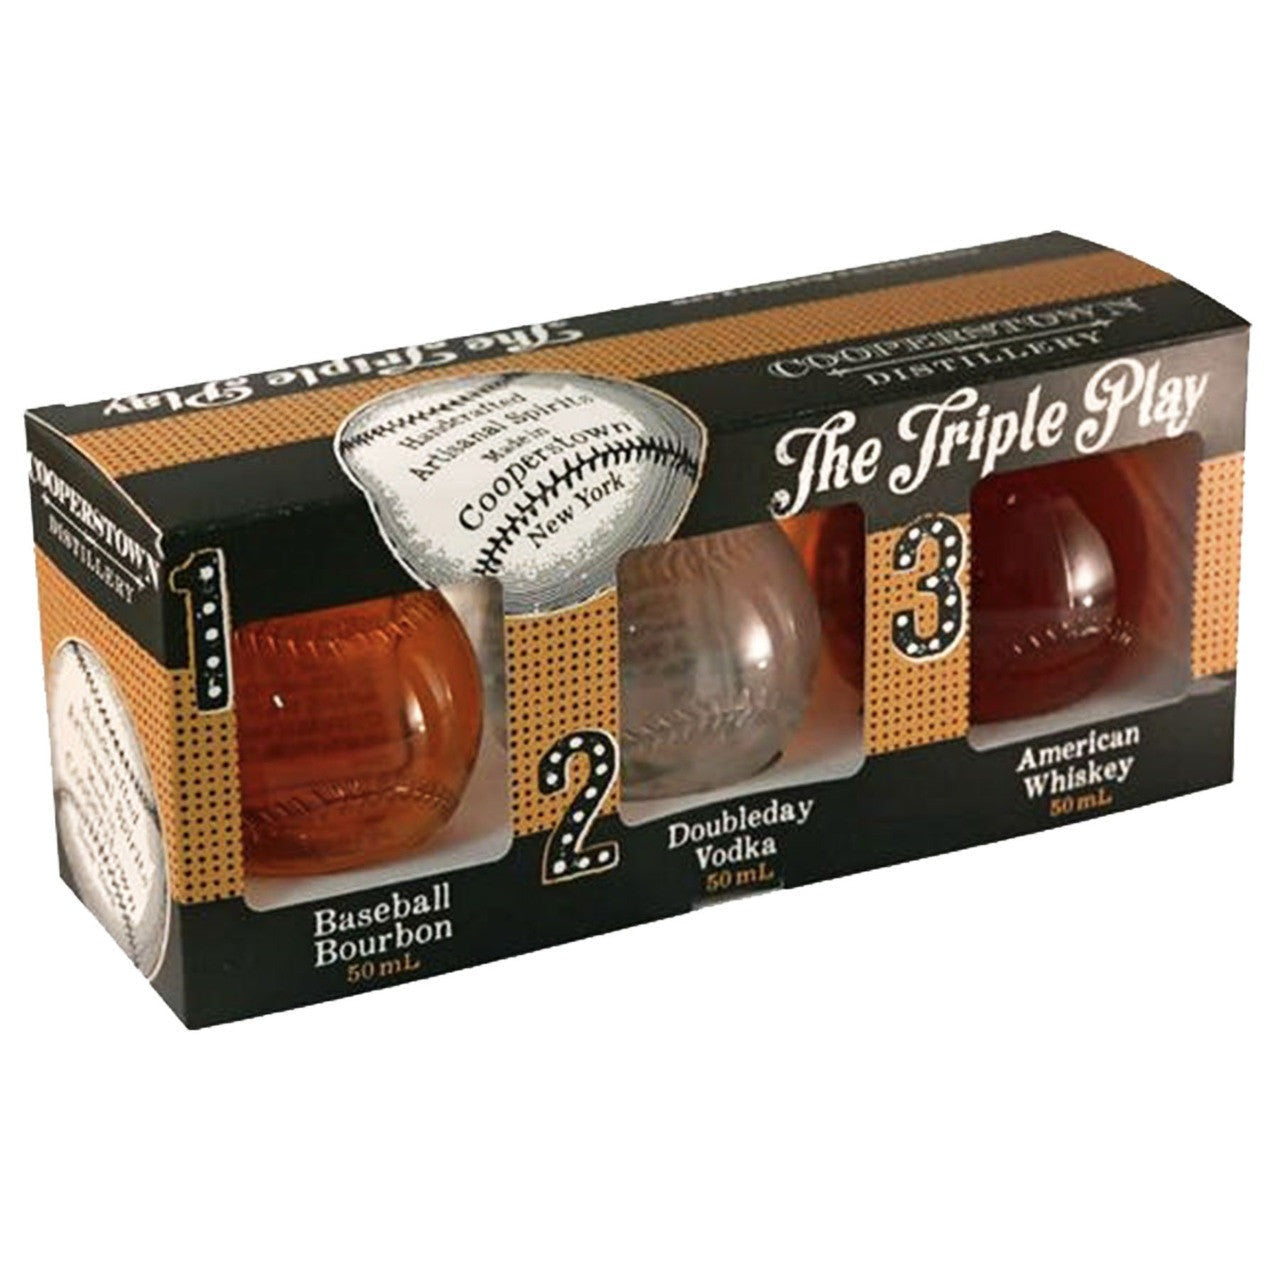 Cooperstown "The Triple Play" Combo Pack 50ml each